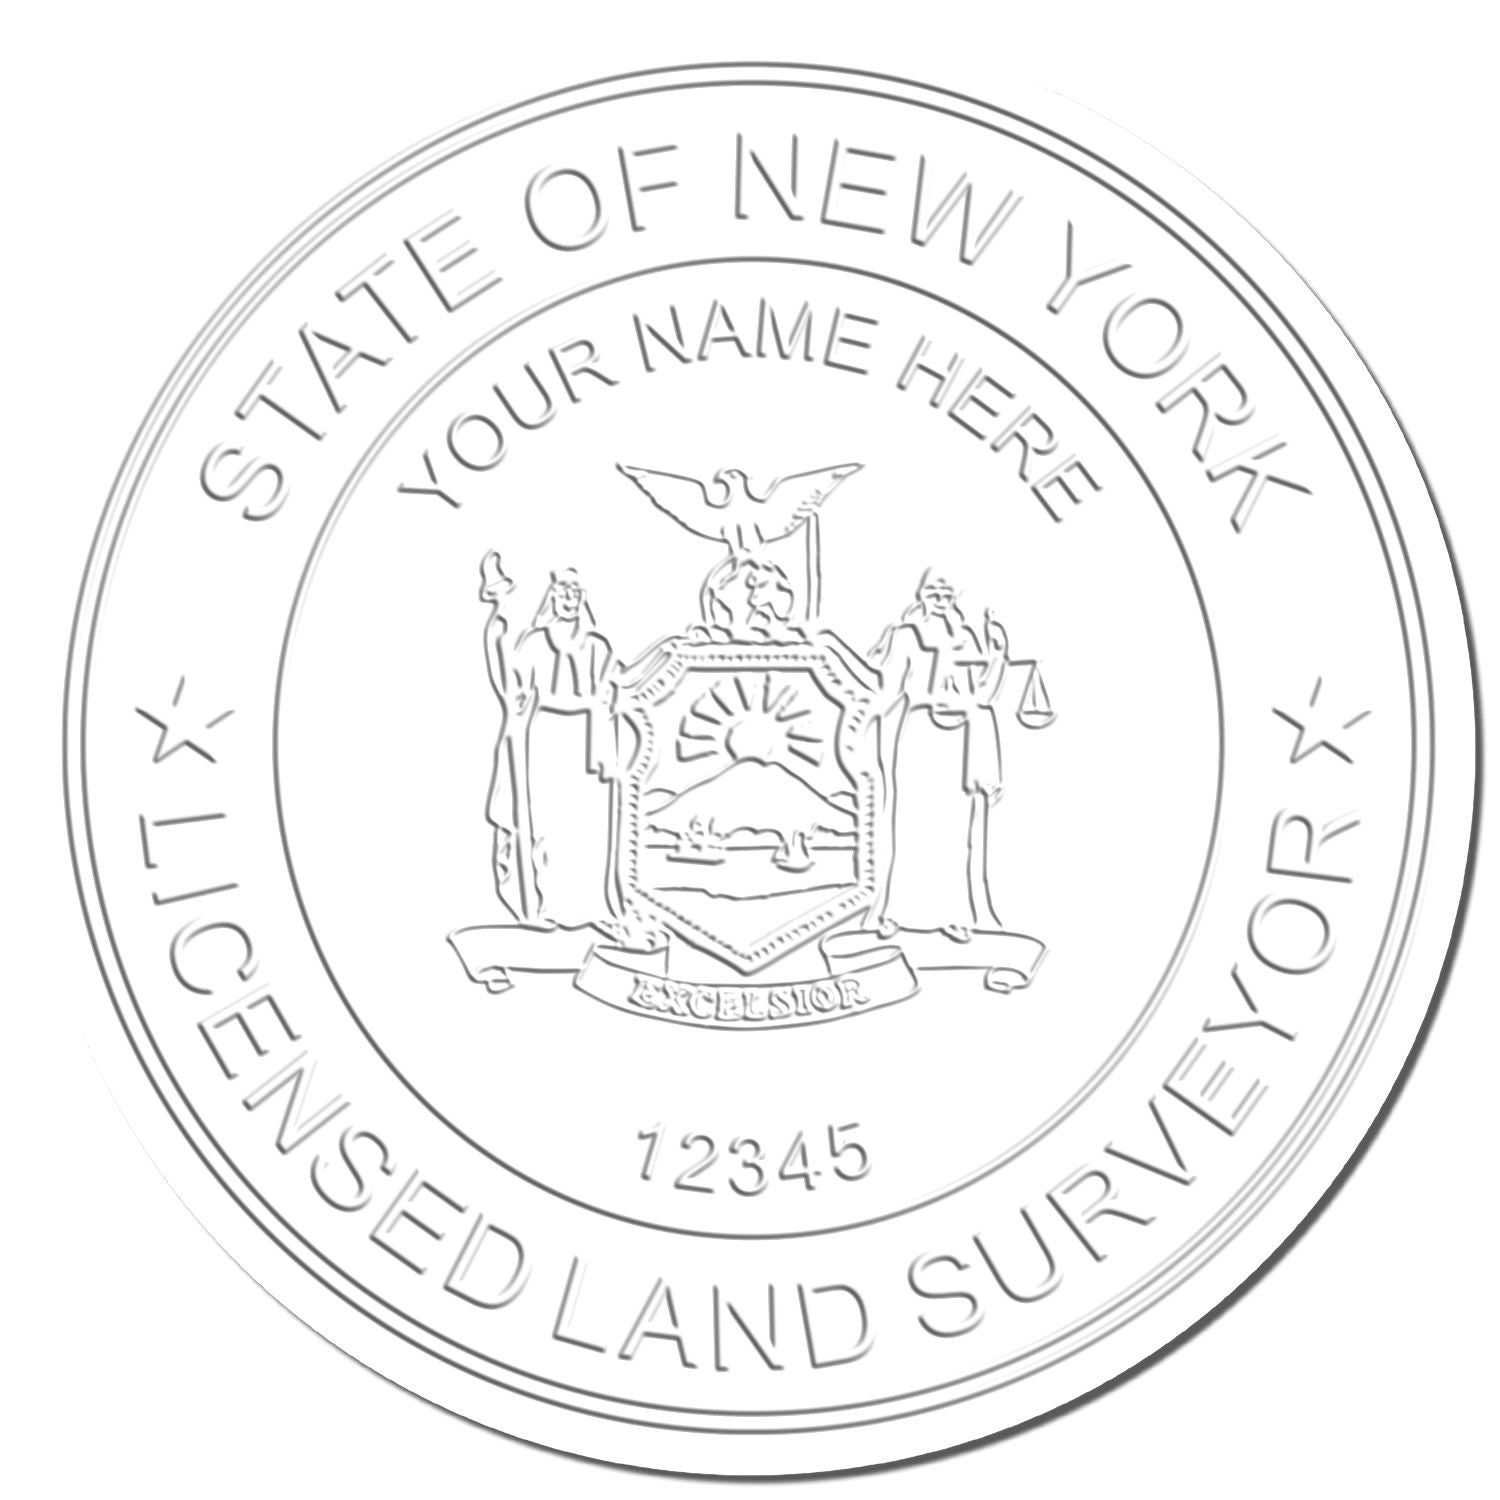 This paper is stamped with a sample imprint of the Handheld New York Land Surveyor Seal, signifying its quality and reliability.